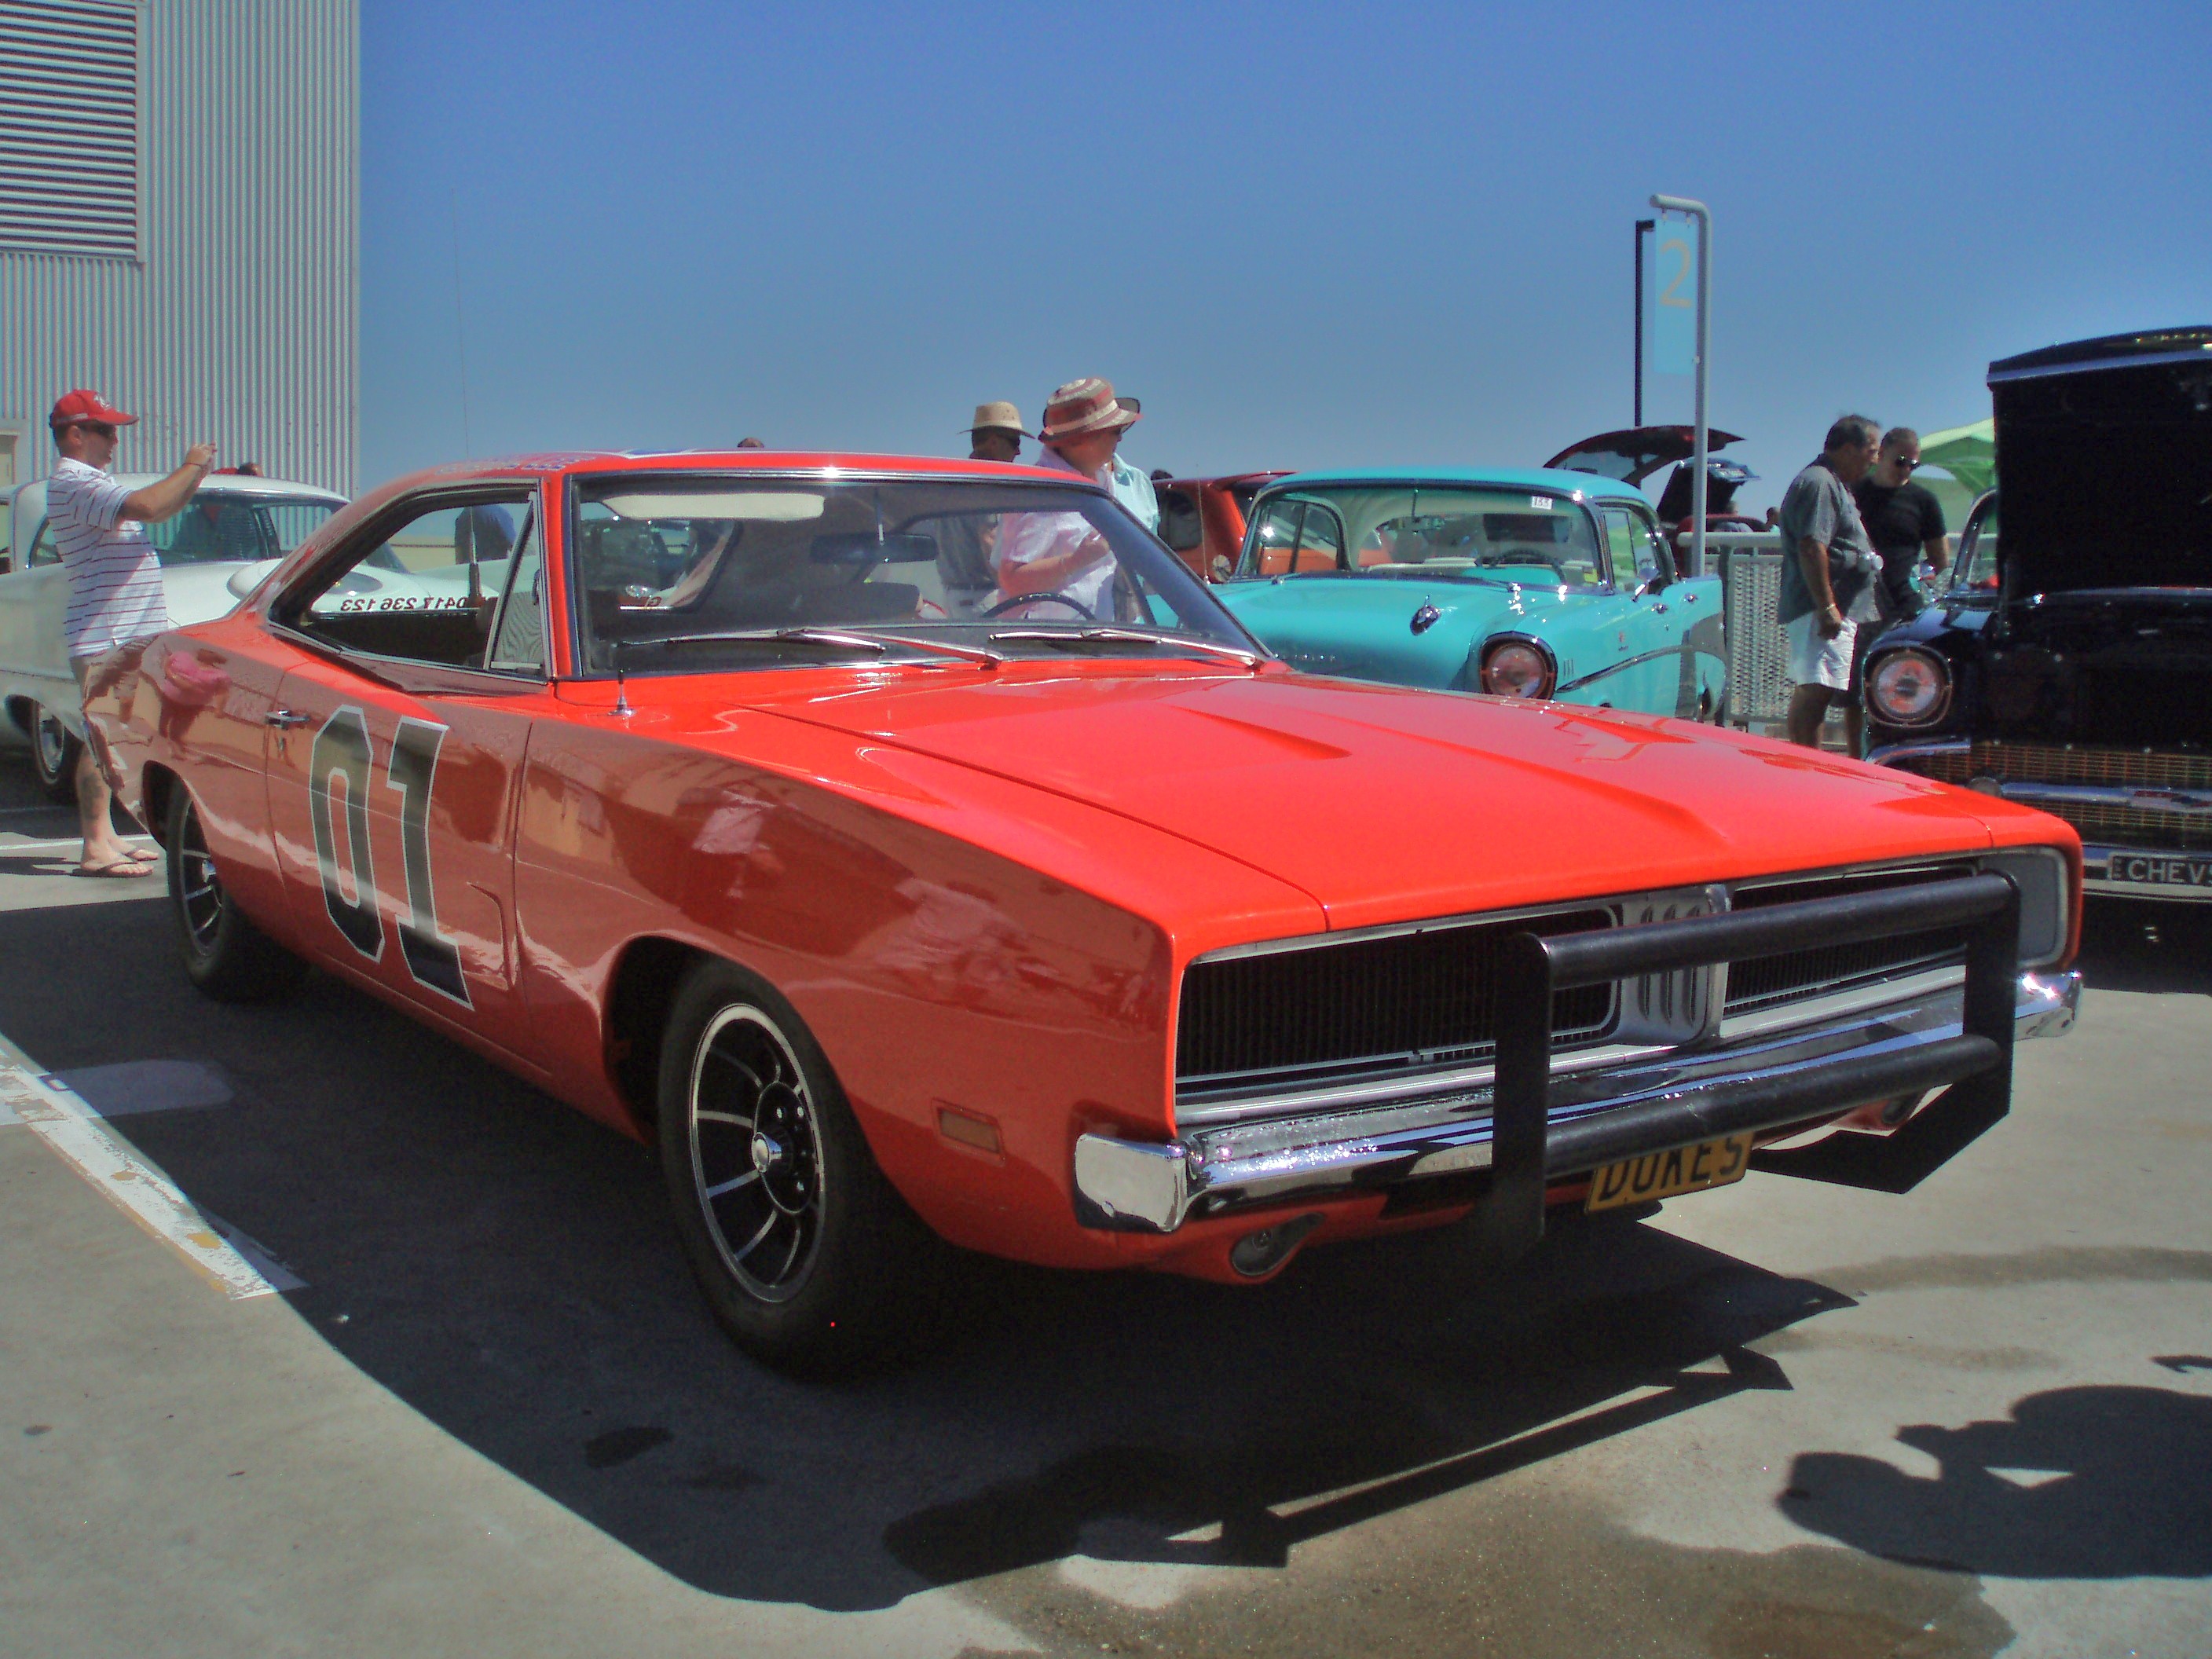 File:1969 Dodge Charger - General Lee (5222134291).jpg - Wikimedia Commons